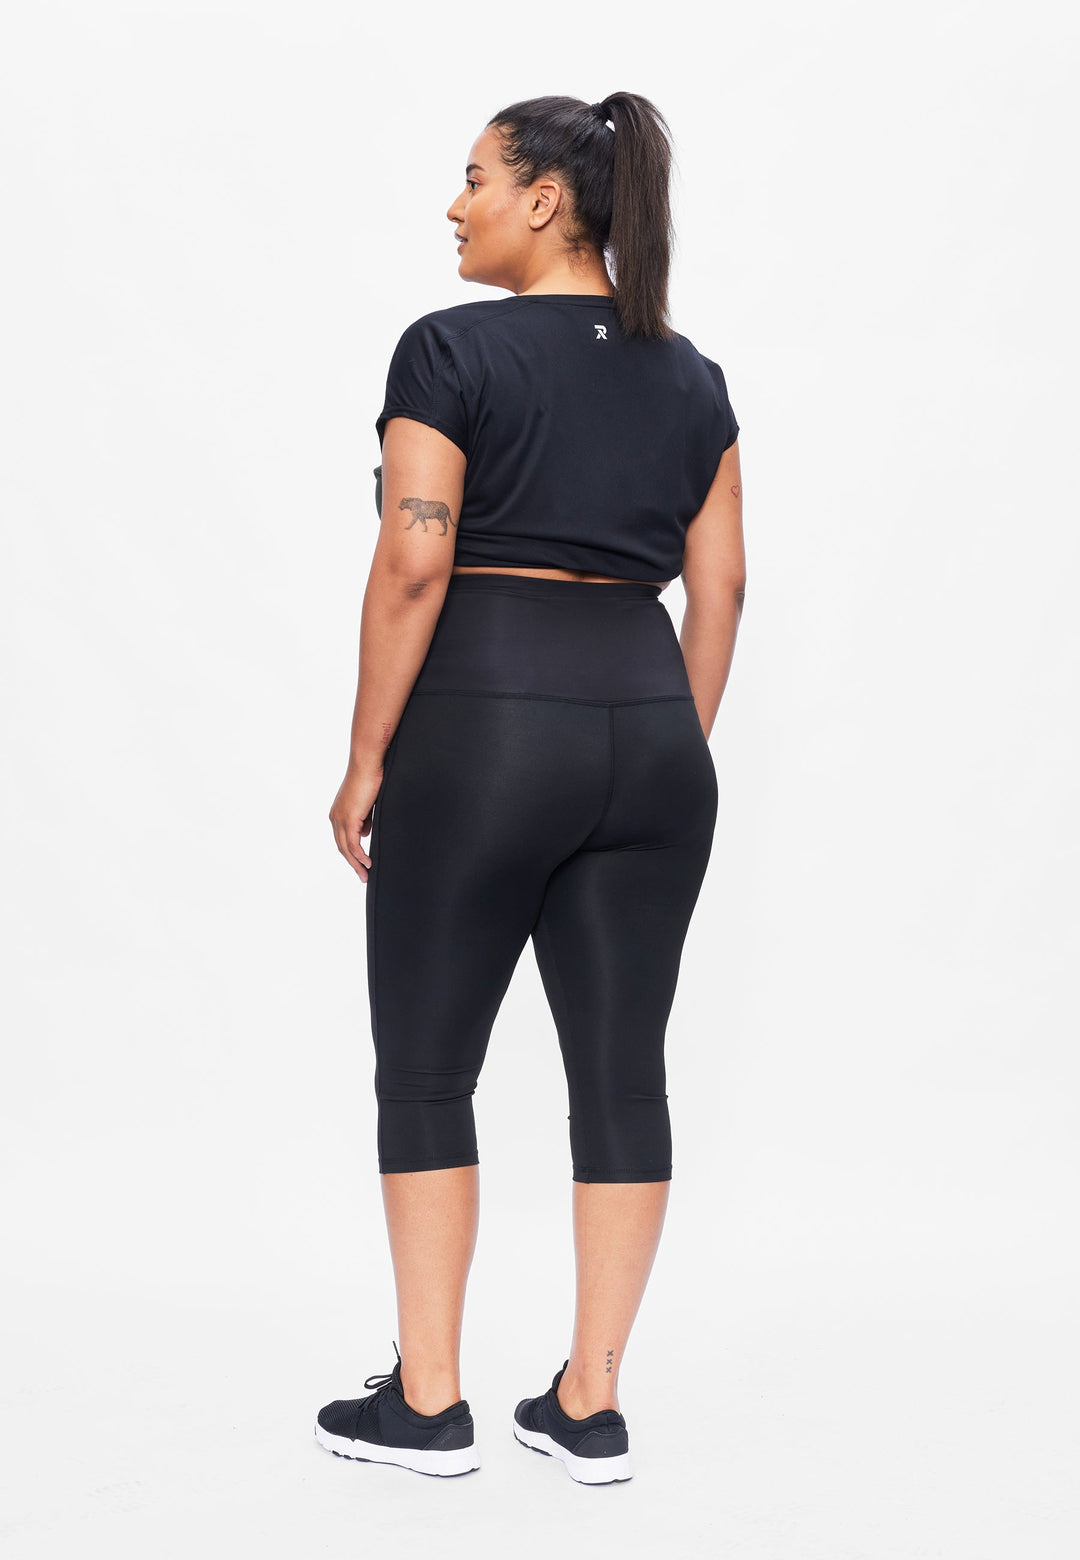 Women's 3/4 shaping tight Dry-Cool - sustainable Plus size